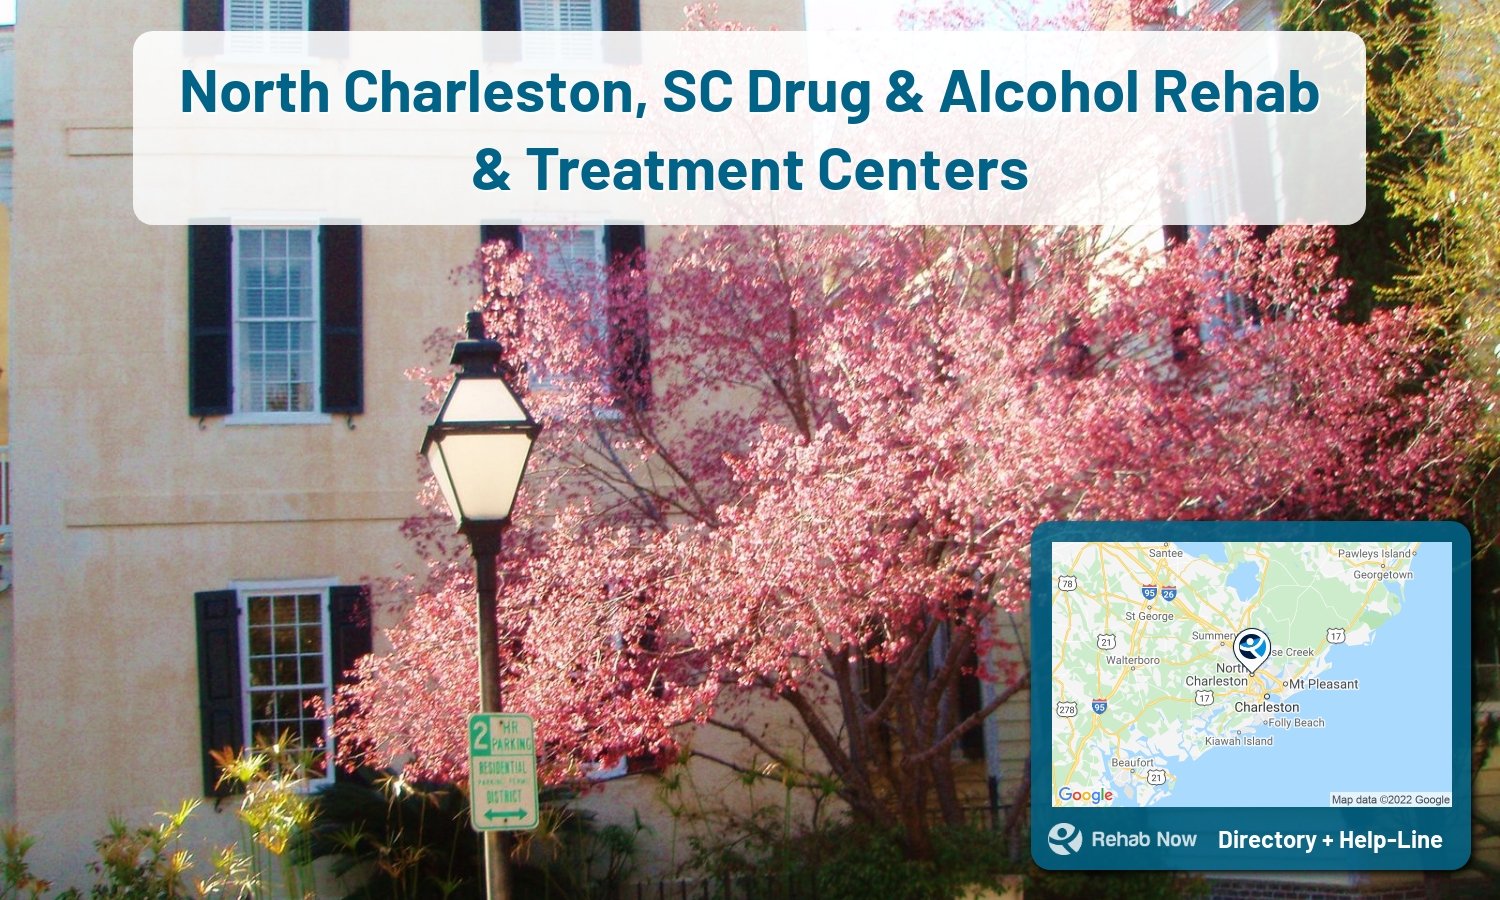 View options, availability, treatment methods, and more, for drug rehab and alcohol treatment in North Charleston, South Carolina